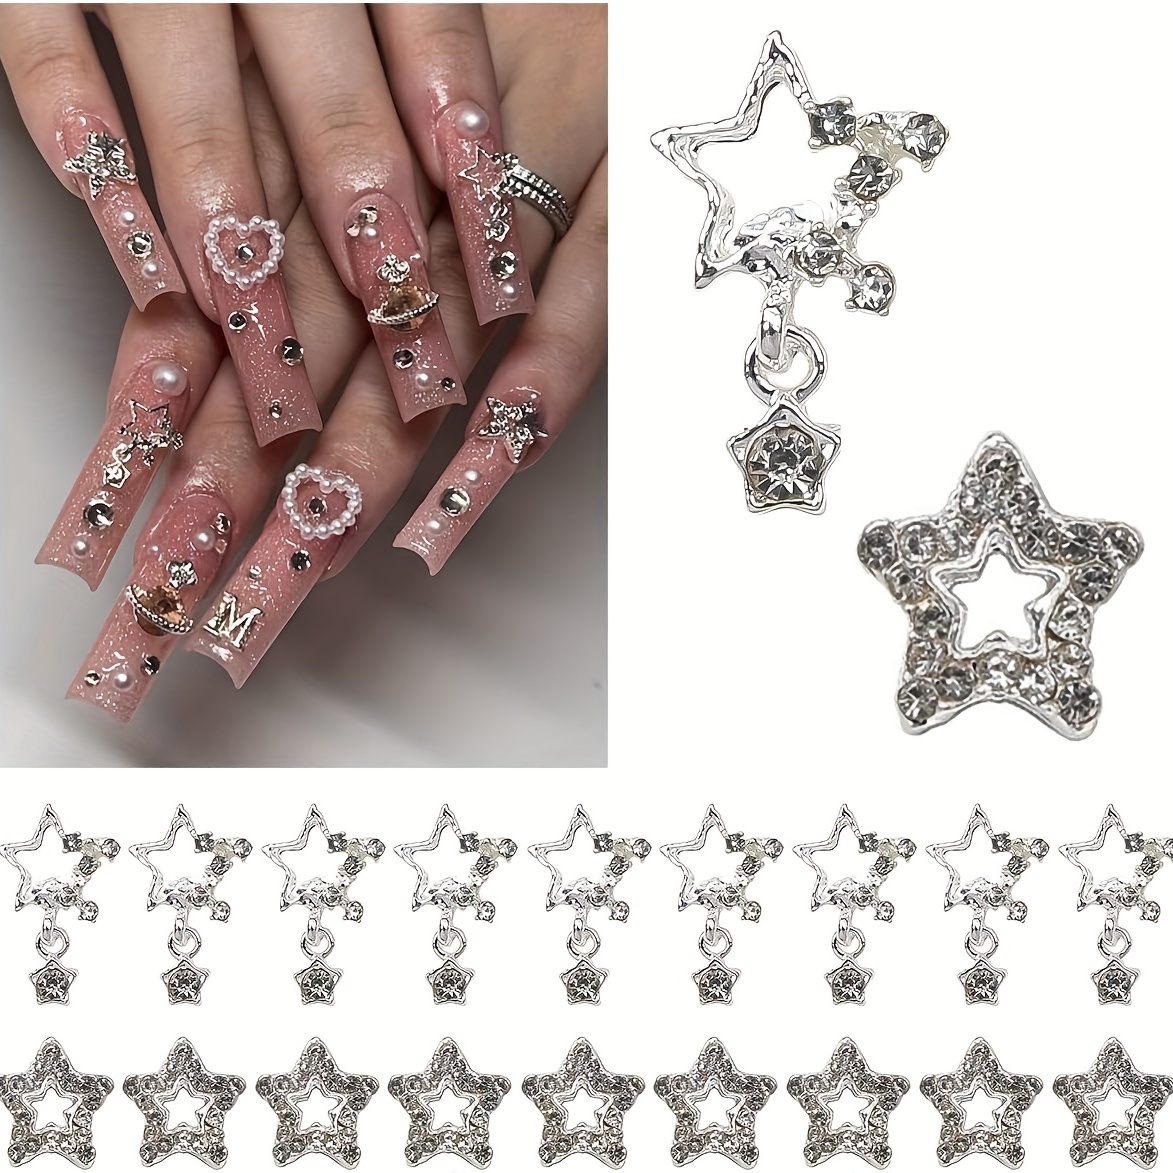  500Pcs Creamy-White Nail Charms Half Pearls Mixed Styles Heart  Bowknot Star Beads Assorted Rhinestones Pearls for Nails Cute 3D Nail  Charms for Nail Art Manicure DIY Crafts Decorations : Beauty